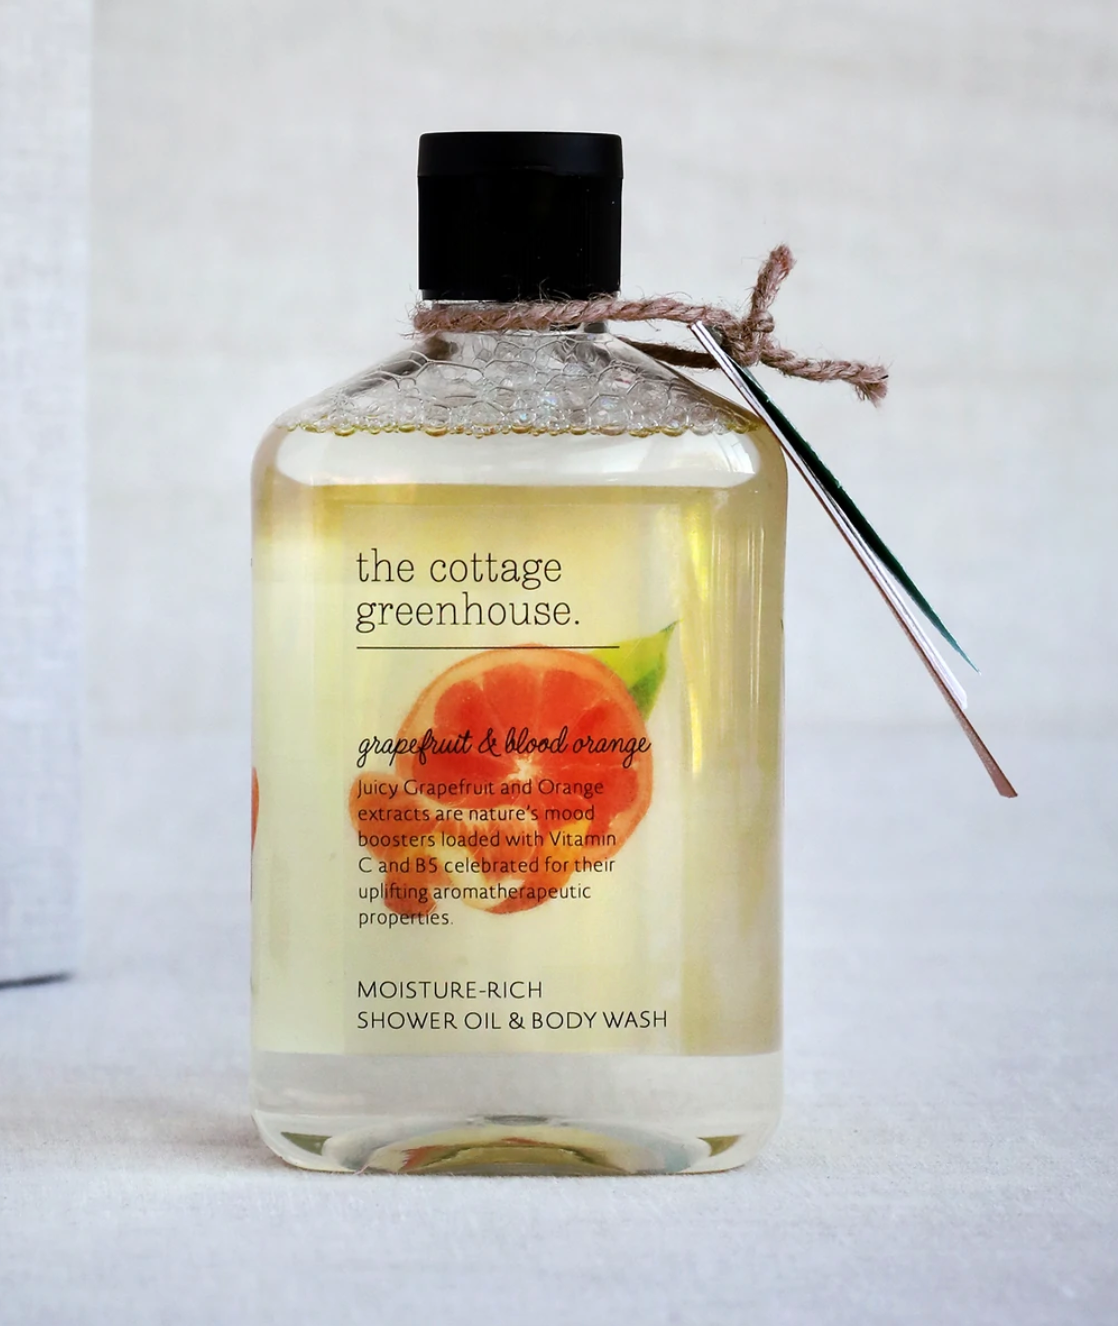 The Cottage Greenhouse Body Wash